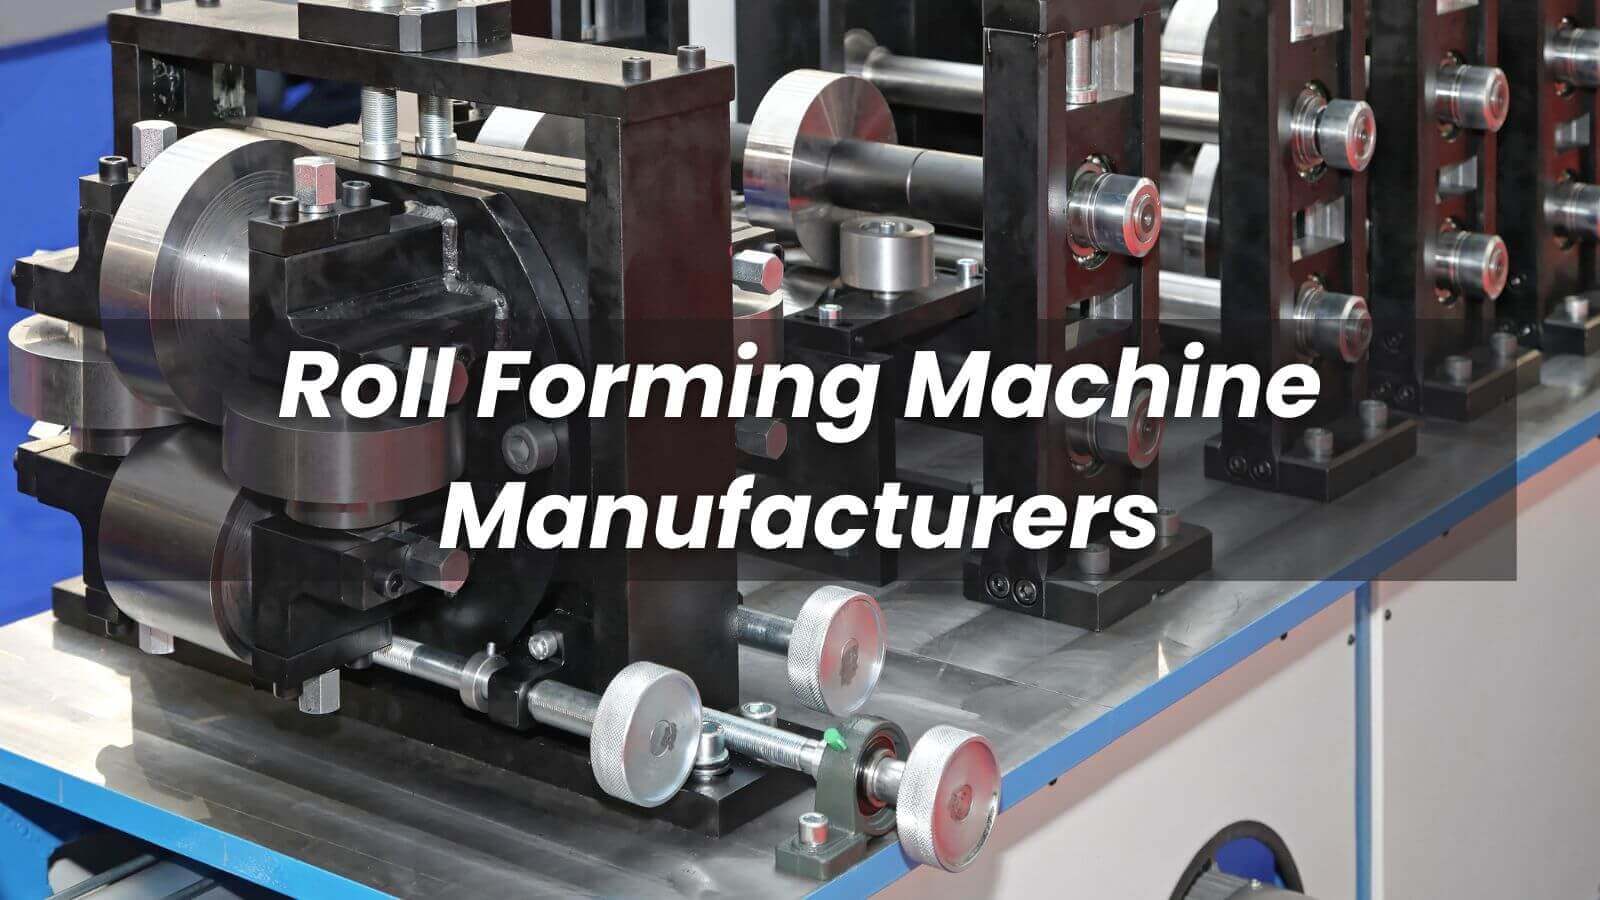 Roll Forming Machine Manufacturers